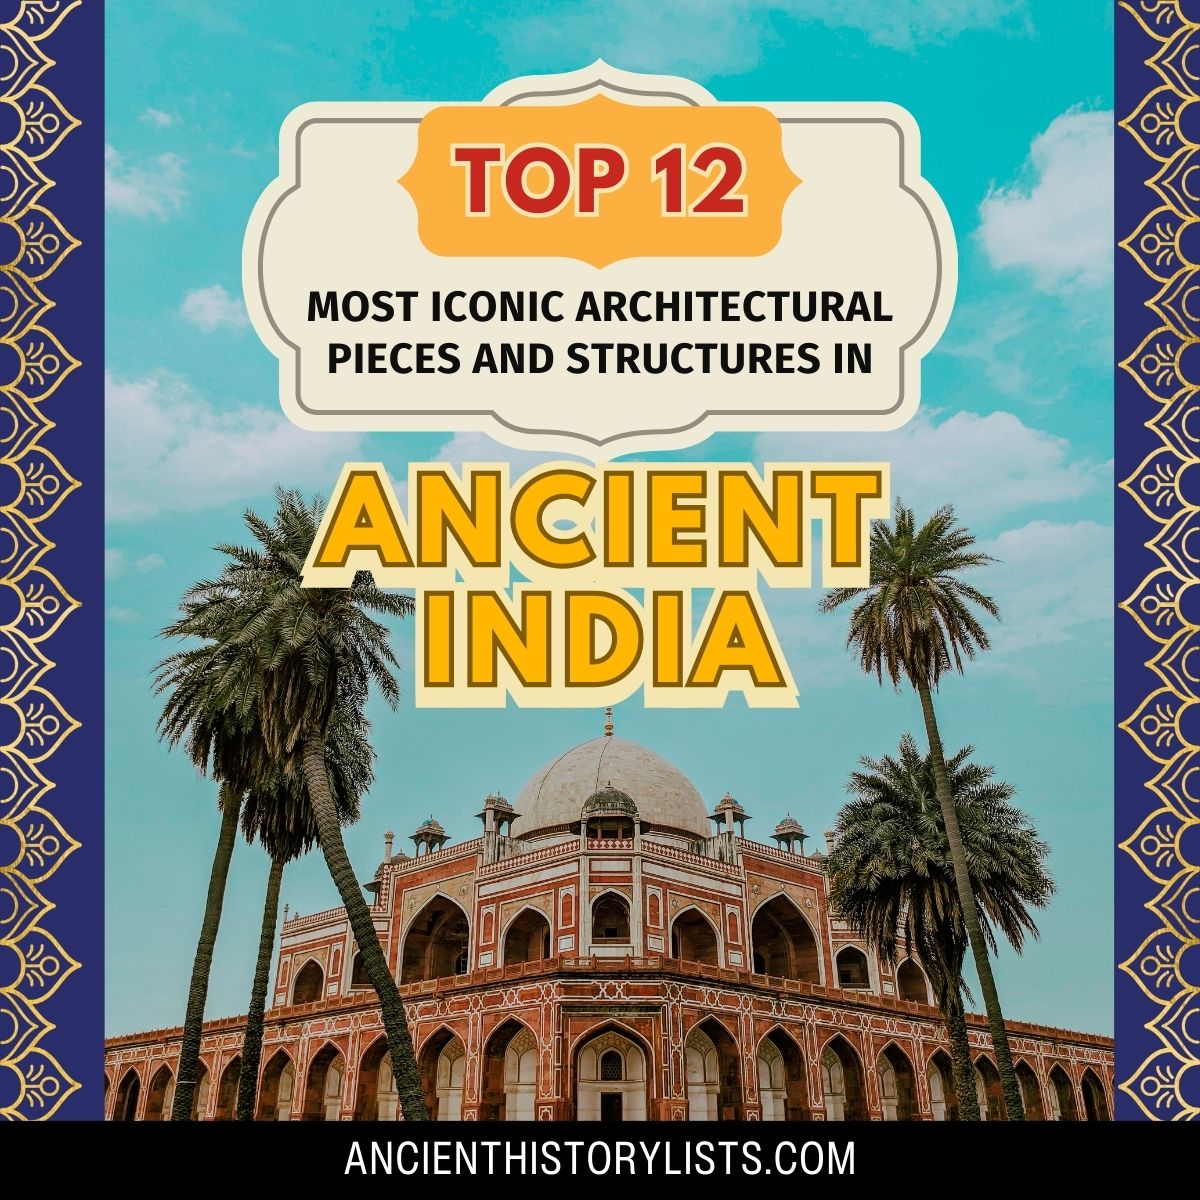 Most Iconic Architectural Pieces and Structures in Ancient India